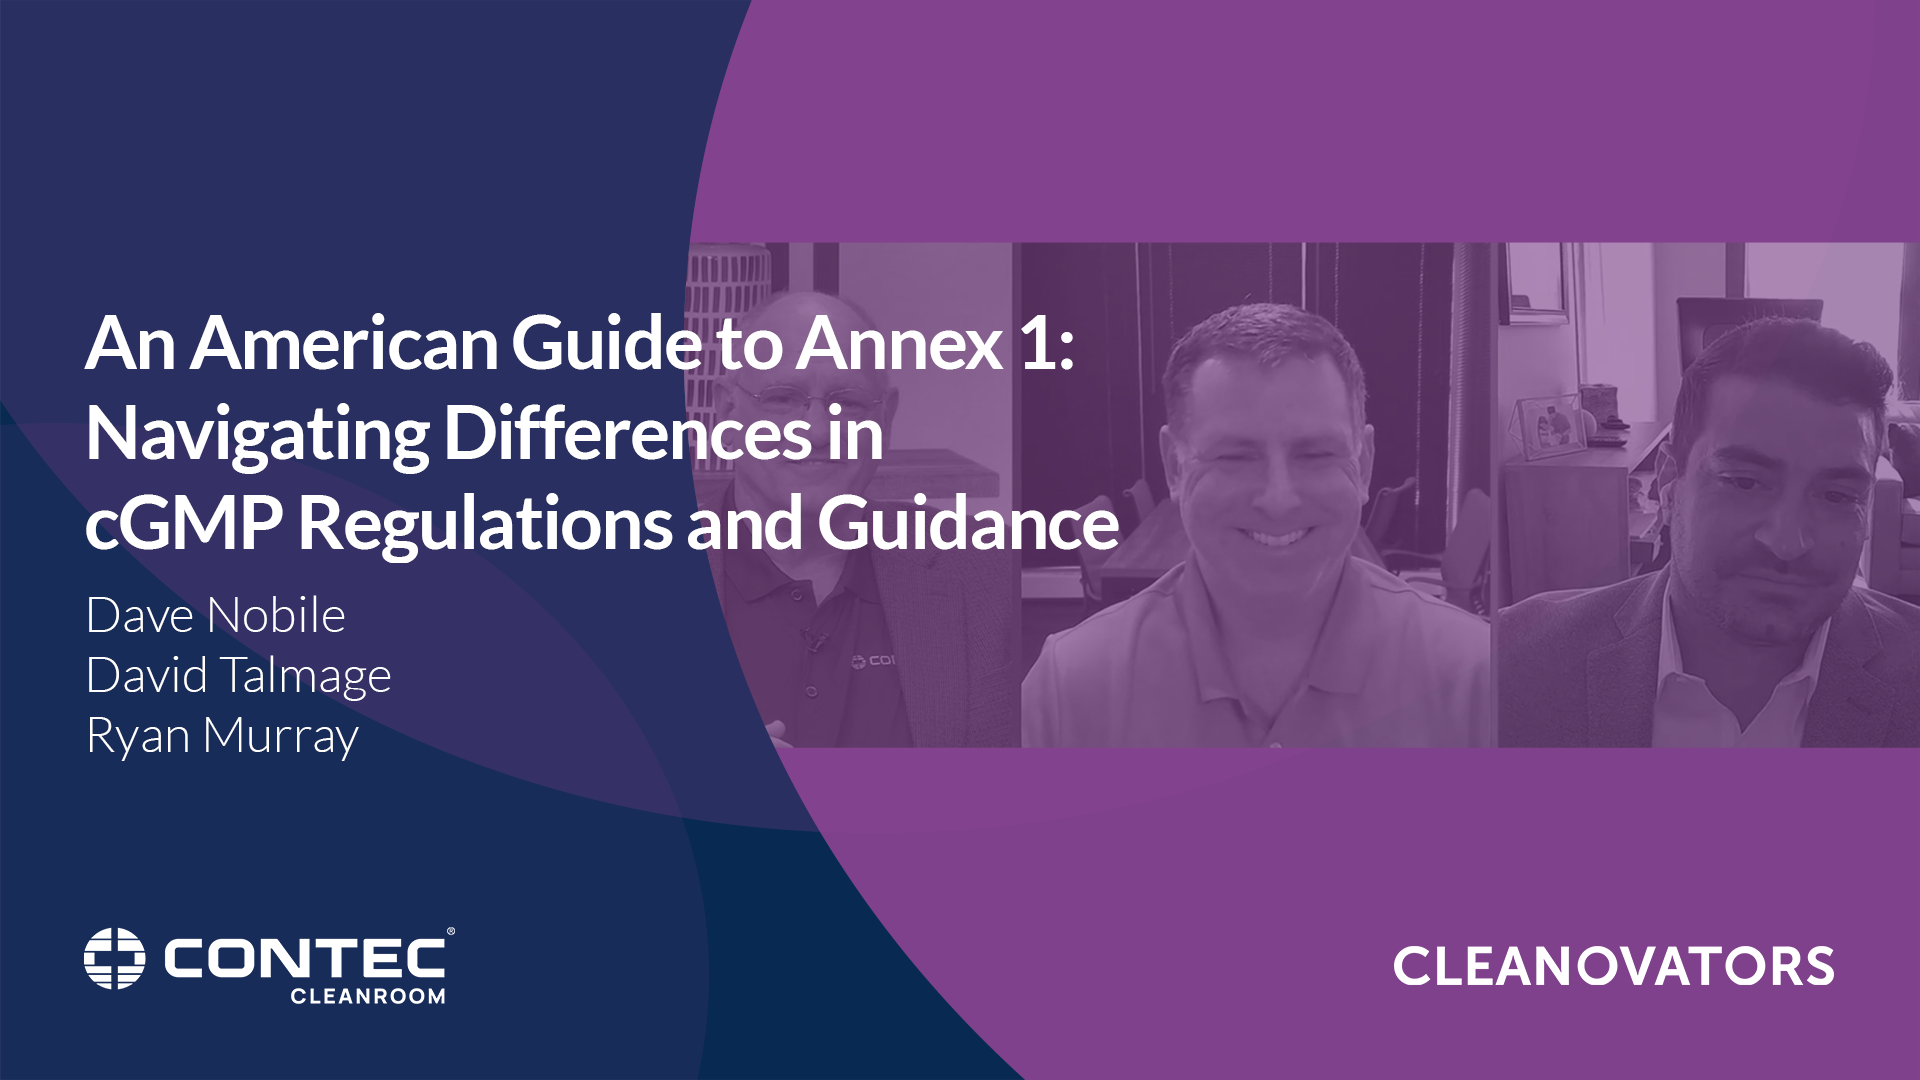 Image of An American Guide to Annex 1: Navigating Differences in cGMP Regulations and Guidance